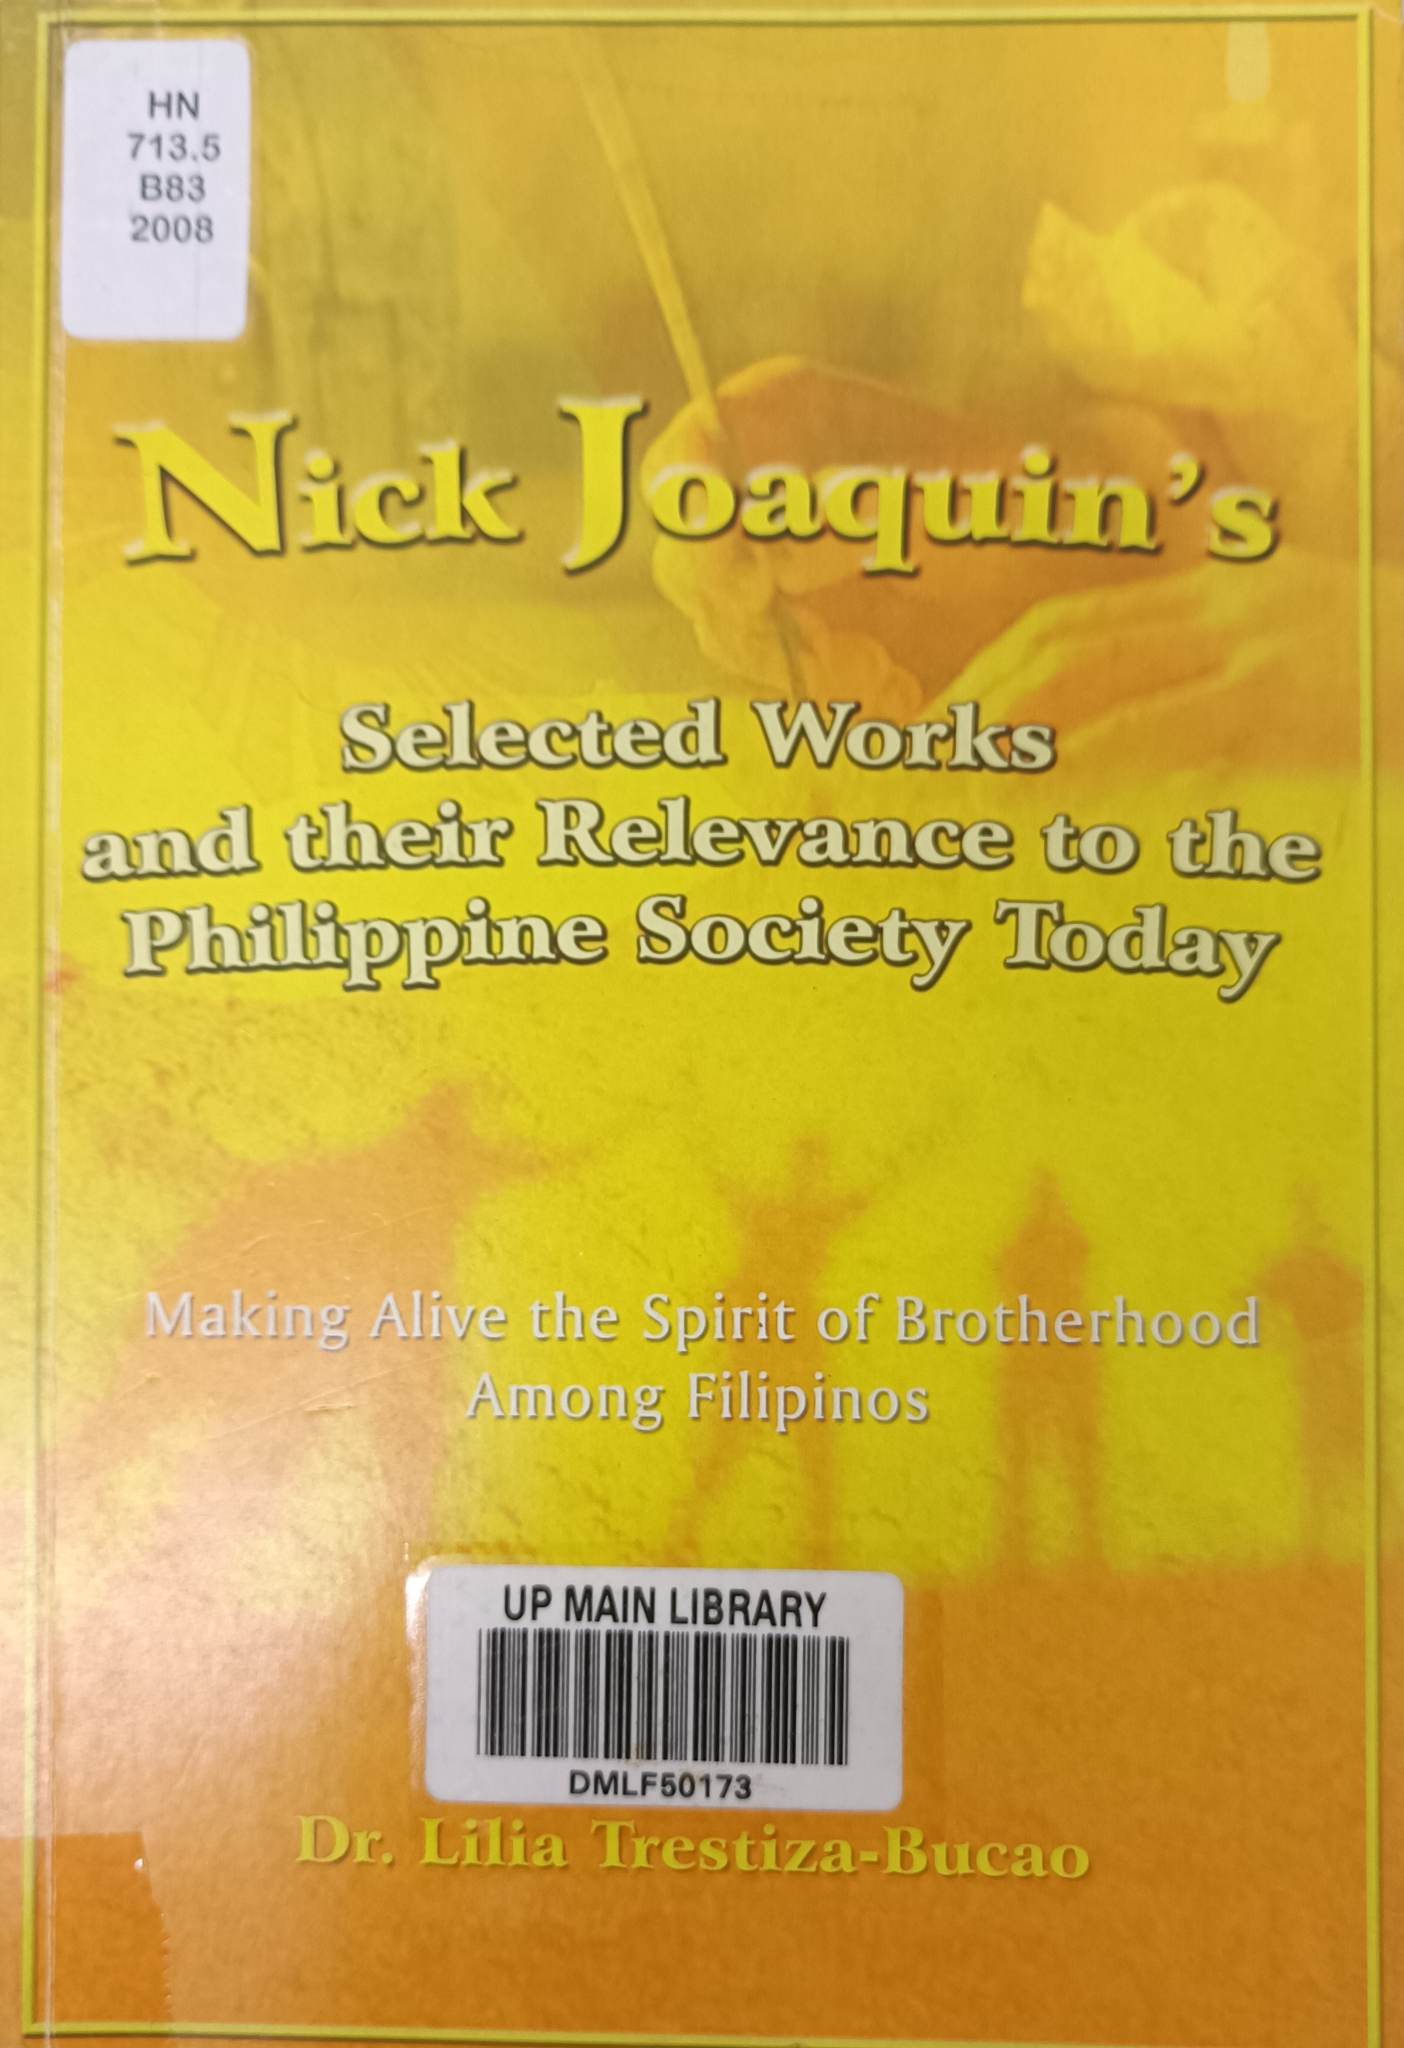 Nick Joaquin's selected works and their relevance to the Philippine society today making alive the spirit of brotherhood among Filipinos